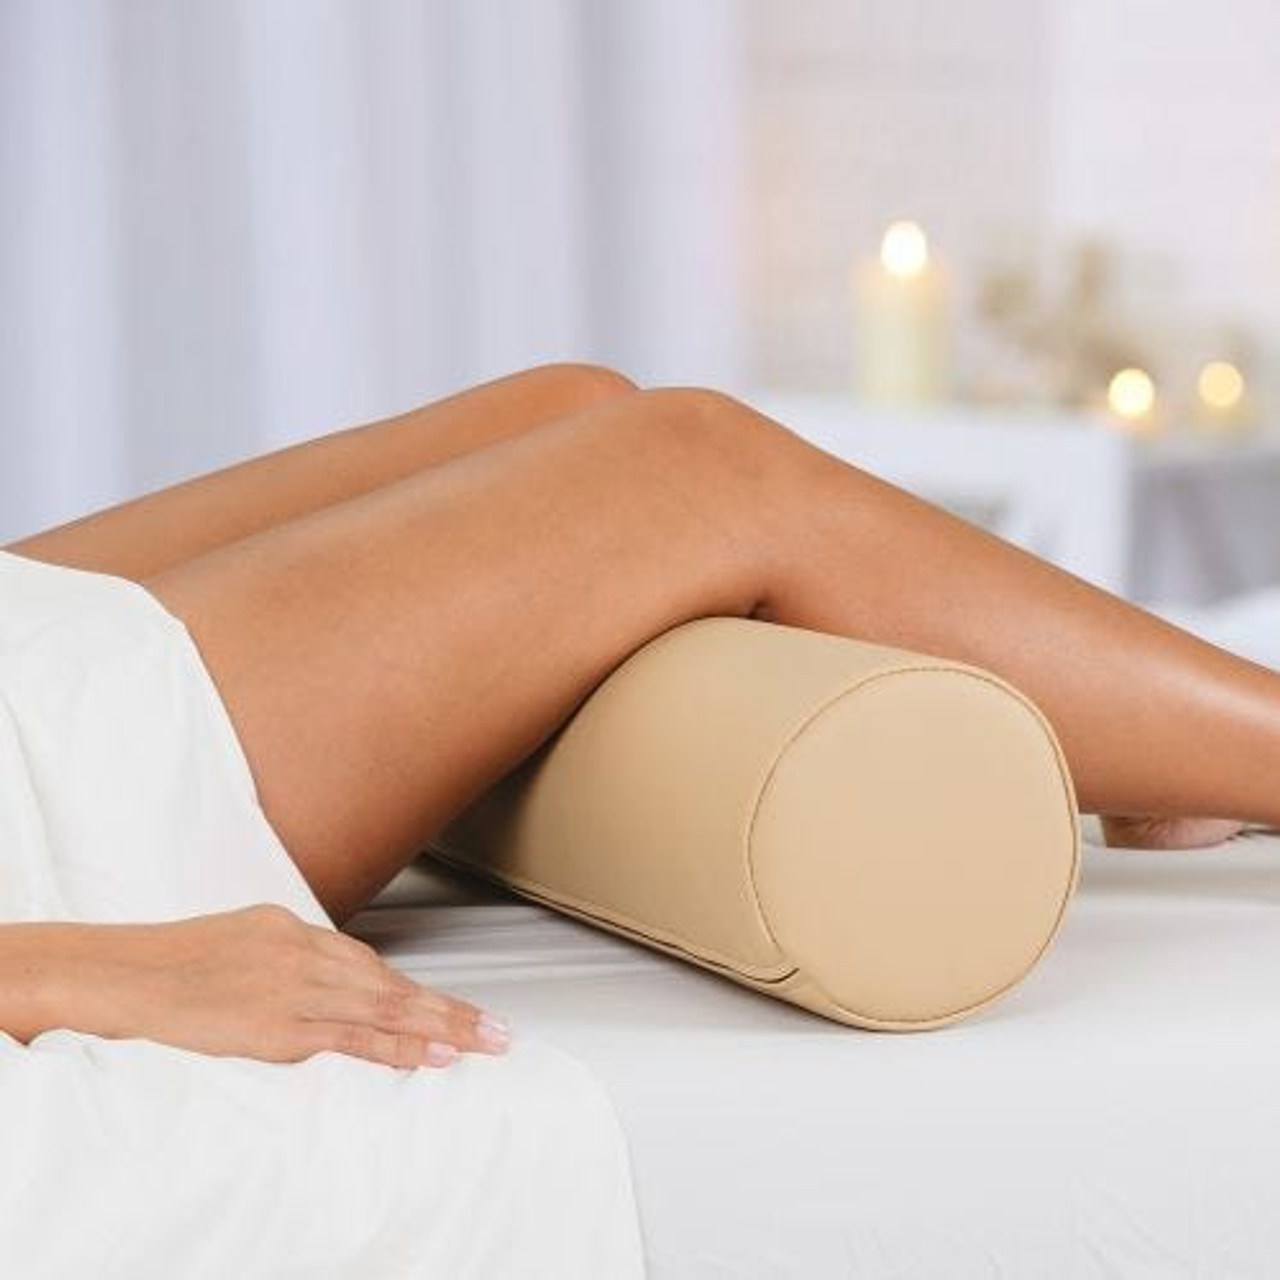 Earthlite Therapy Bolster, Full Round